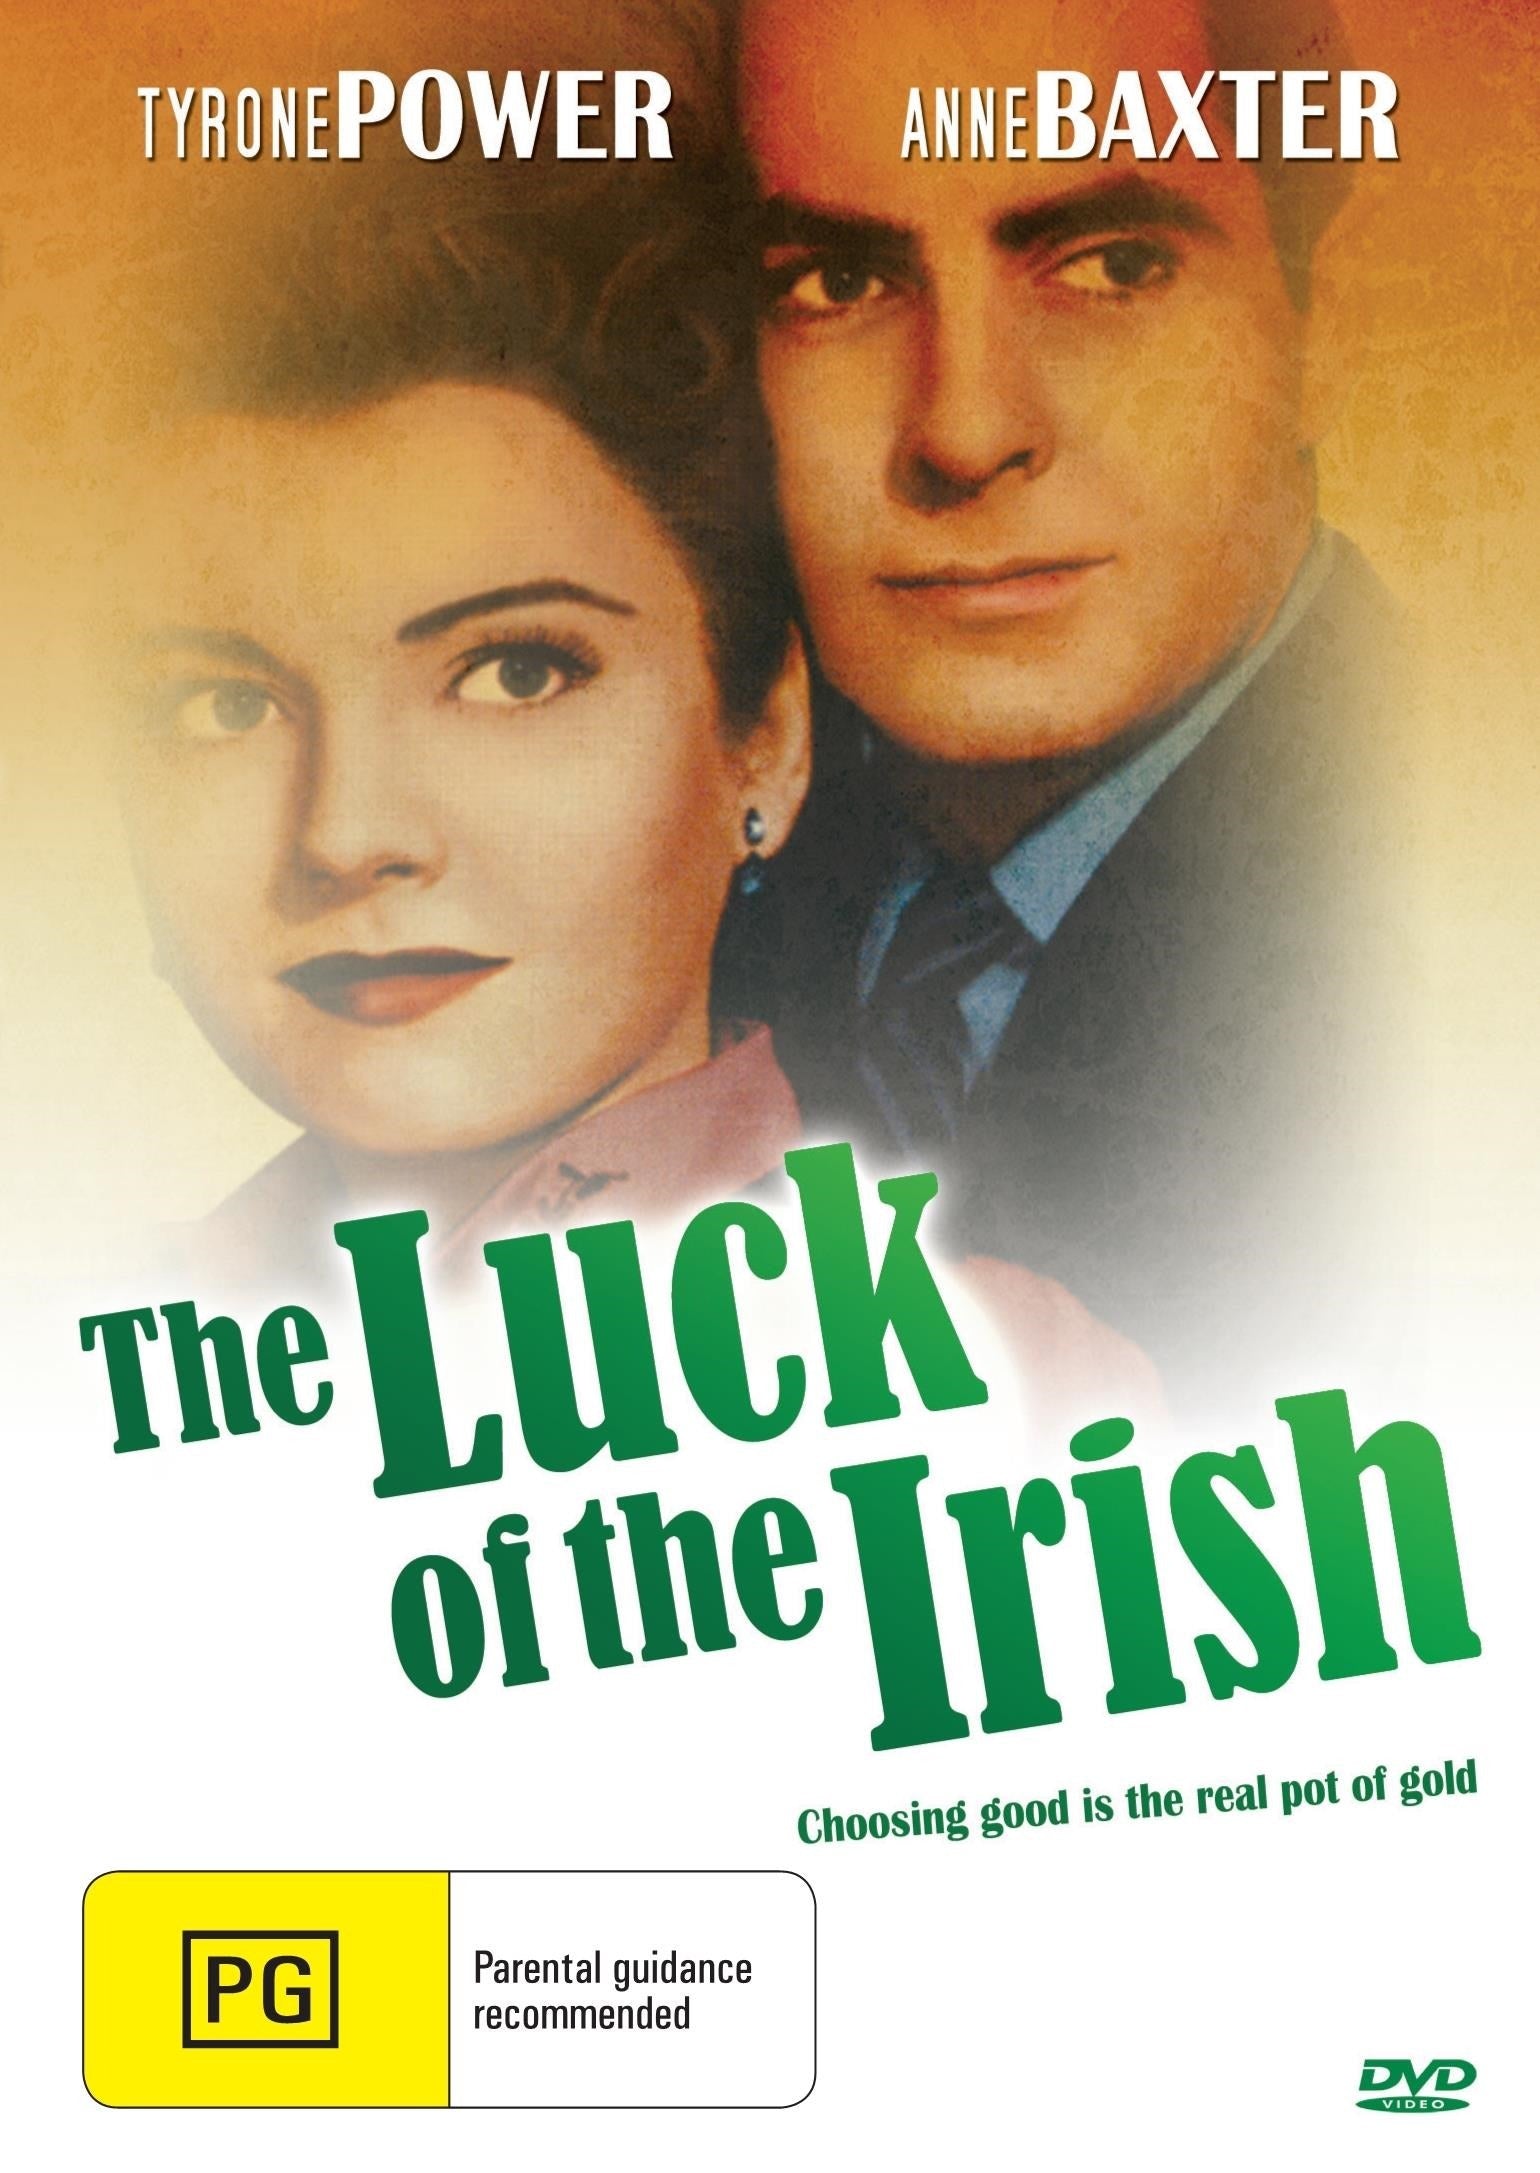 The Luck of the Irish rareandcollectibledvds